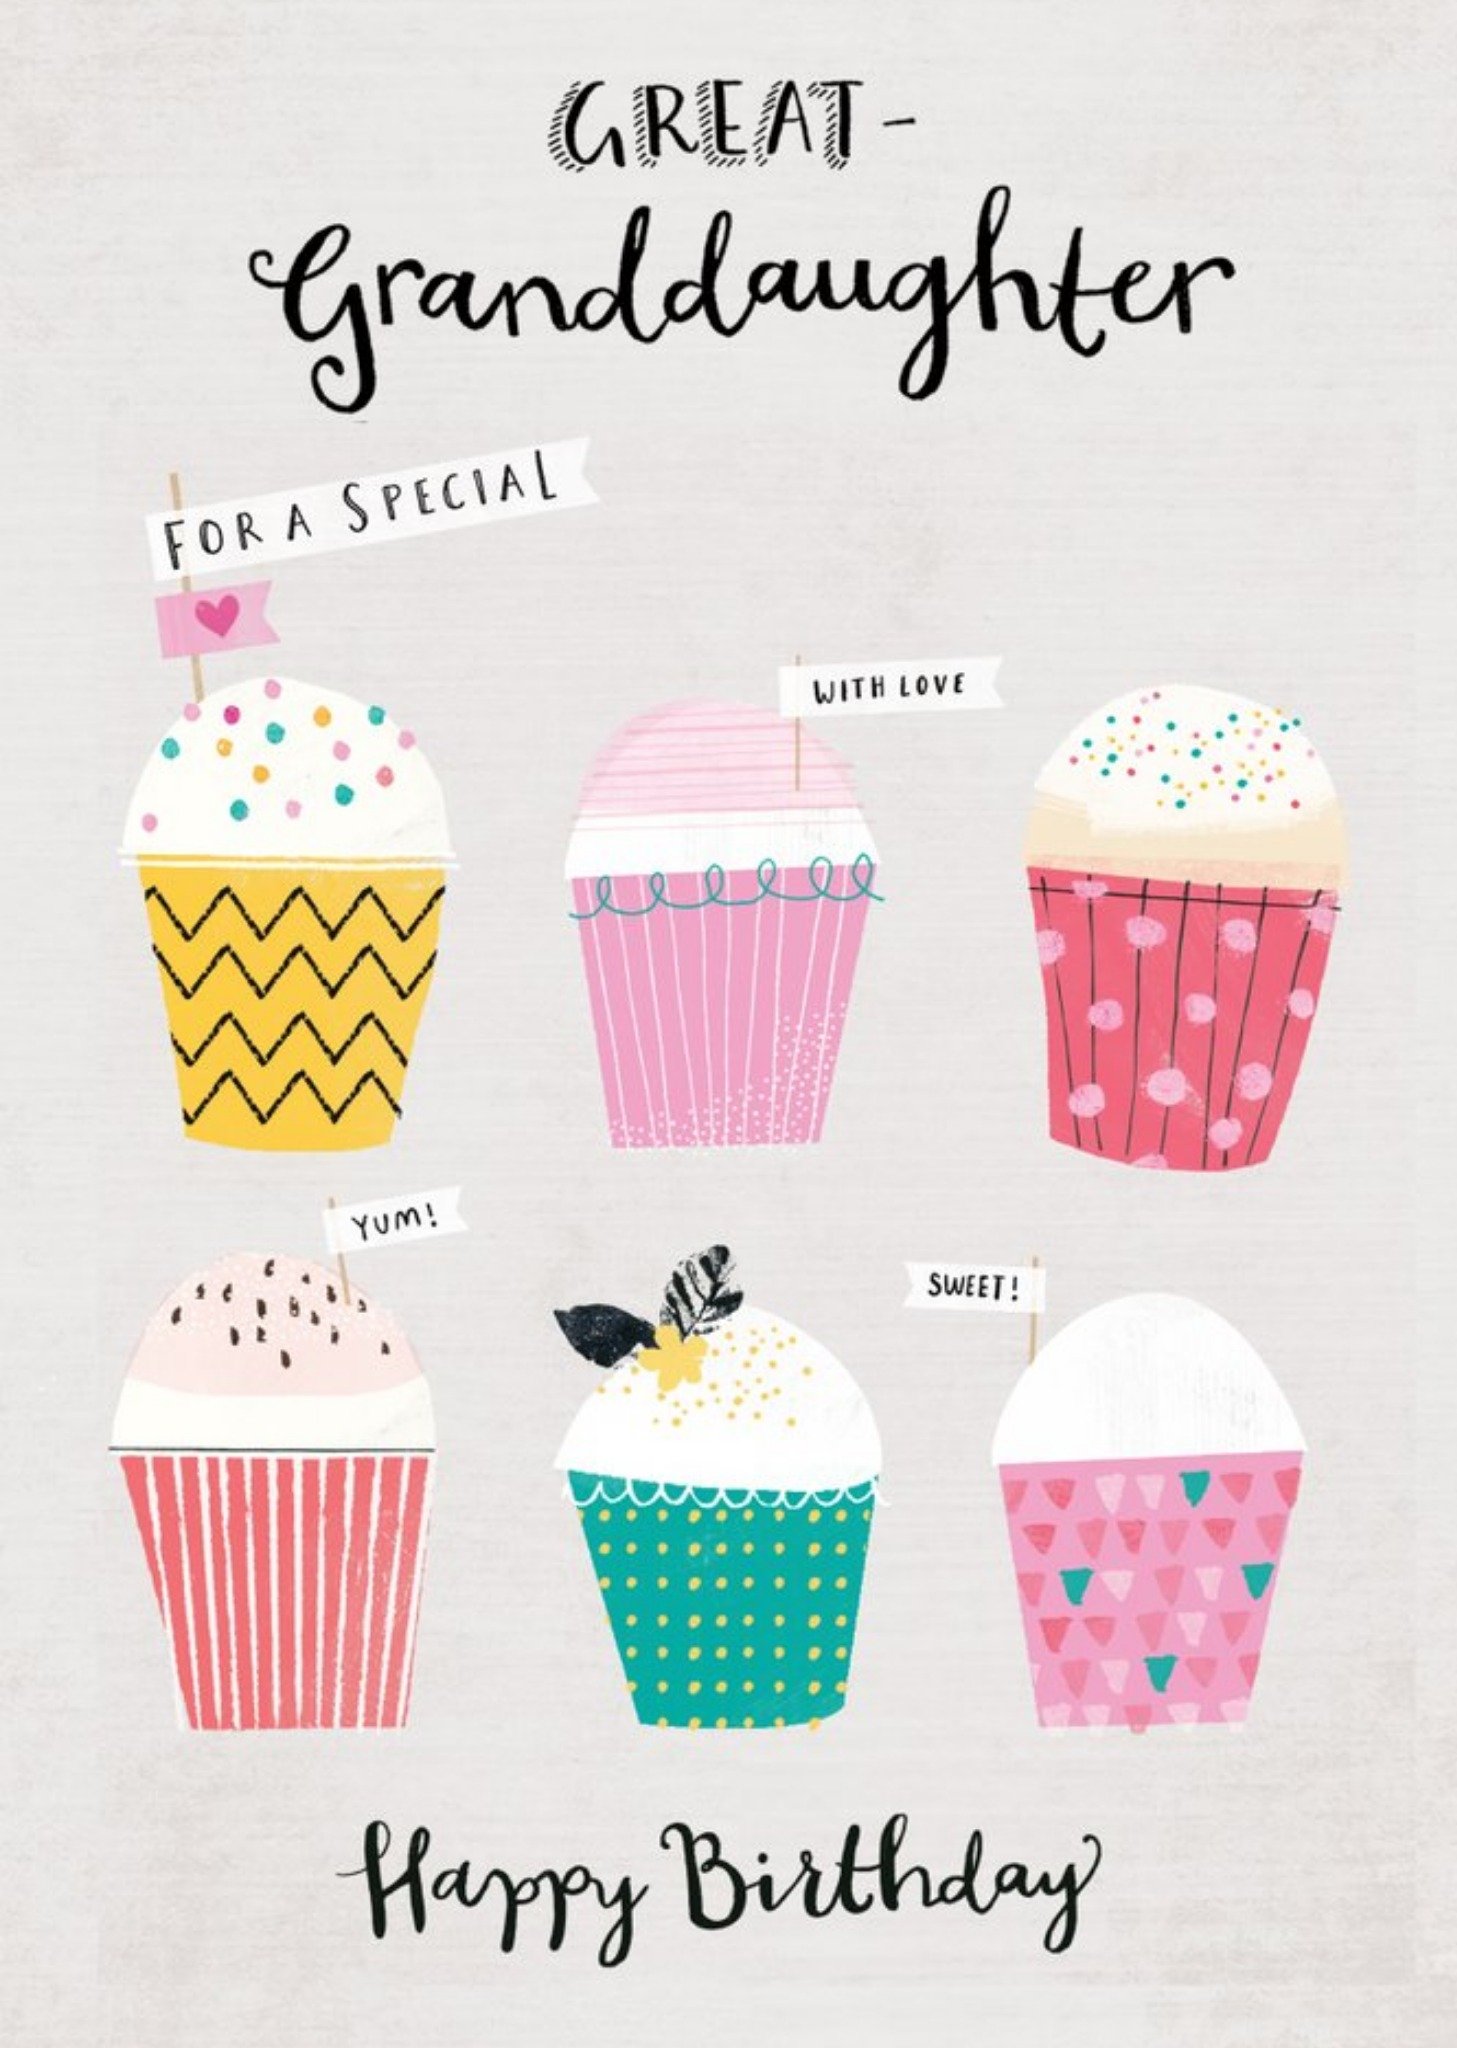 Moonpig Illustrated Cupcakes Typographic Great Granddaughter Birthday Card, Large